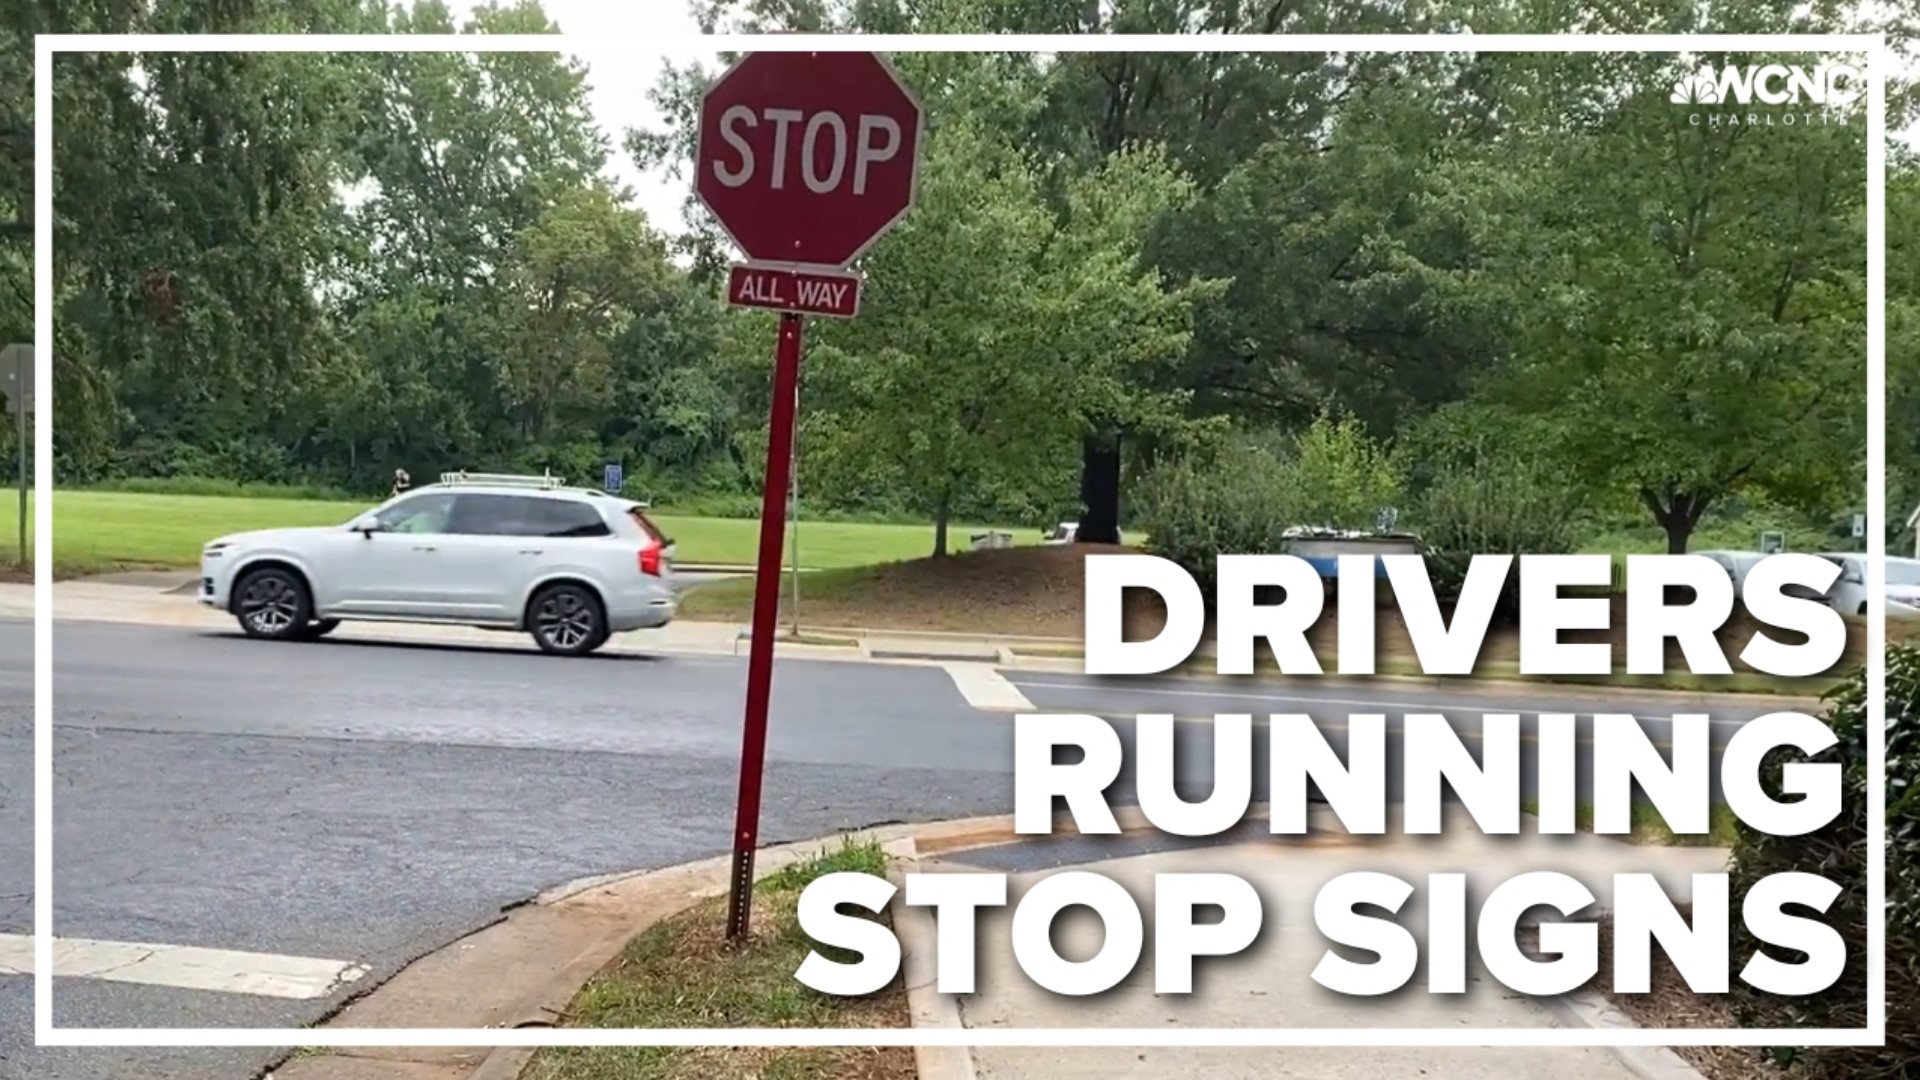 WCNC has received dozens of videos of people running stop signs at the intersection.